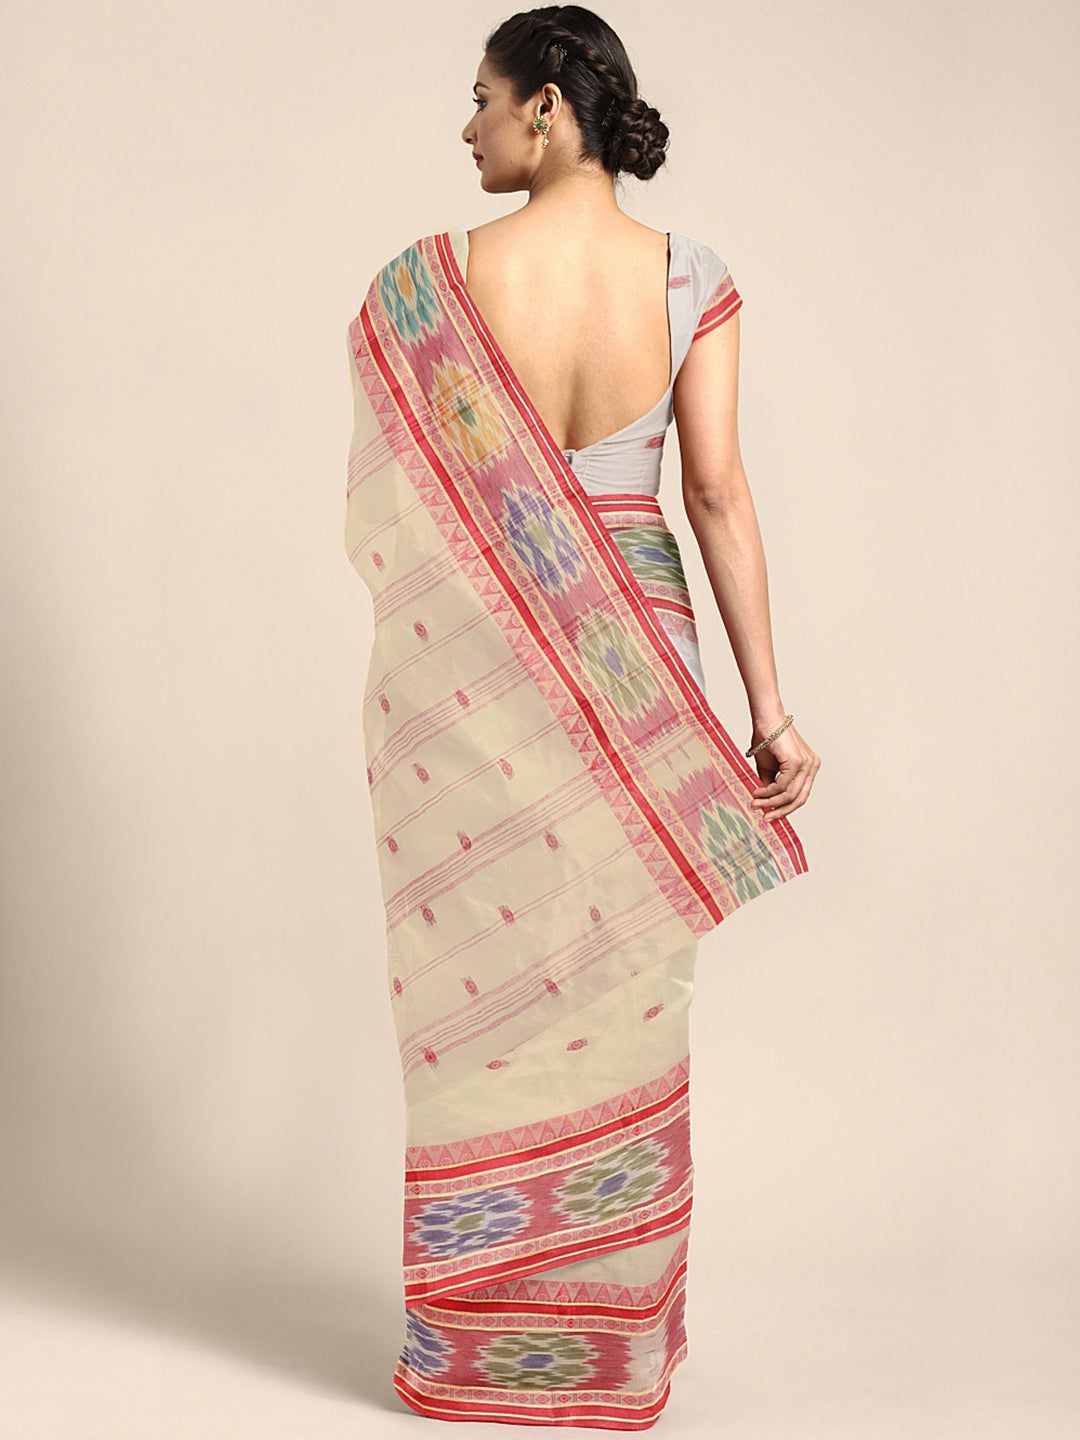 Peach Tant Woven Design Saree Without Blouse Piece DUTASA045 DUTASA045-Saree-Kalakari India-DUTASA045-Geographical Indication, Hand Crafted, Heritage Prints, Natural Dyes, Sarees, Silk Cotton, Sustainable Fabrics, Taant, Tant, West Bengal, Woven-[Linen,Ethnic,wear,Fashionista,Handloom,Handicraft,Indigo,blockprint,block,print,Cotton,Chanderi,Blue, latest,classy,party,bollywood,trendy,summer,style,traditional,formal,elegant,unique,style,hand,block,print, dabu,booti,gift,present,glamorous,affordabl